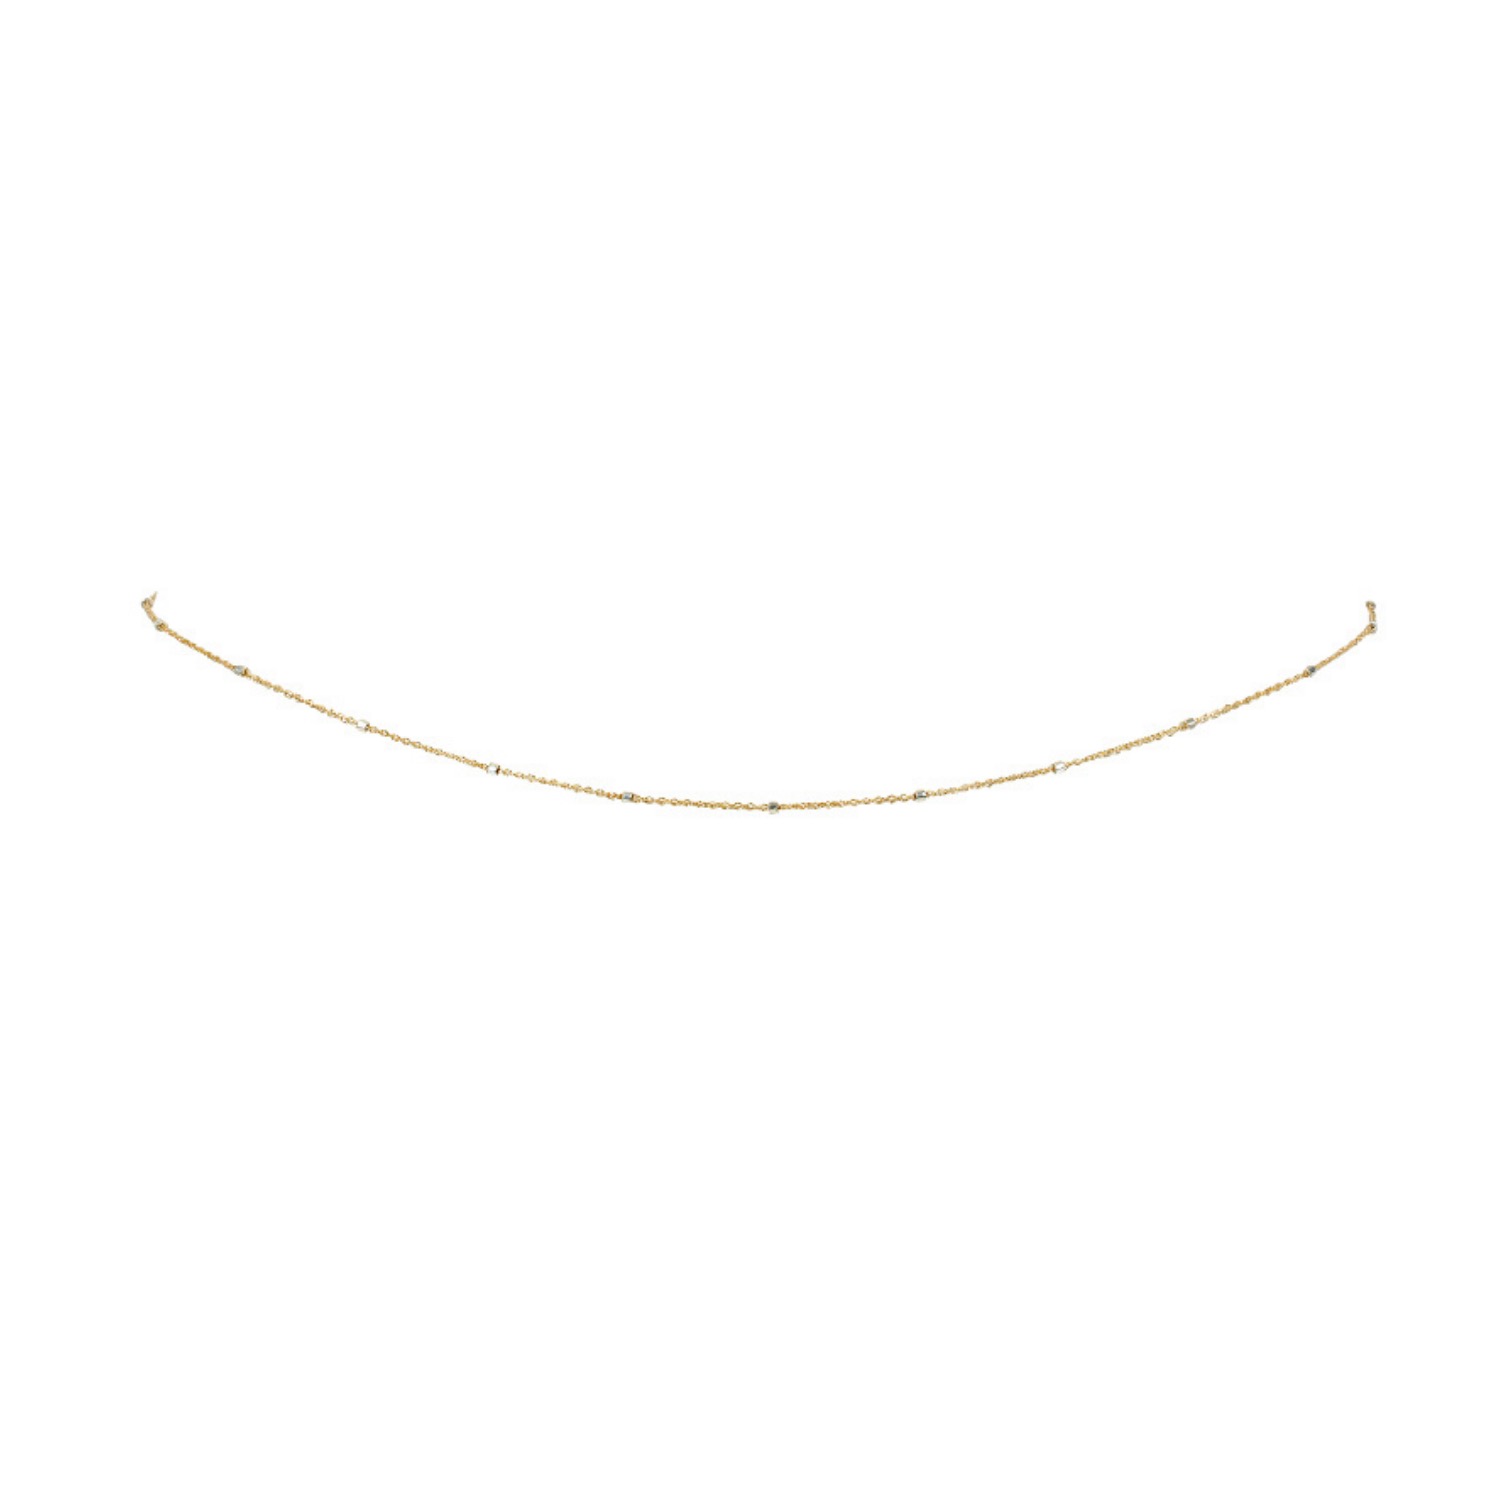 Naiia Women's Sienna Gold & Silver Multiwear Belly Chain And Necklace